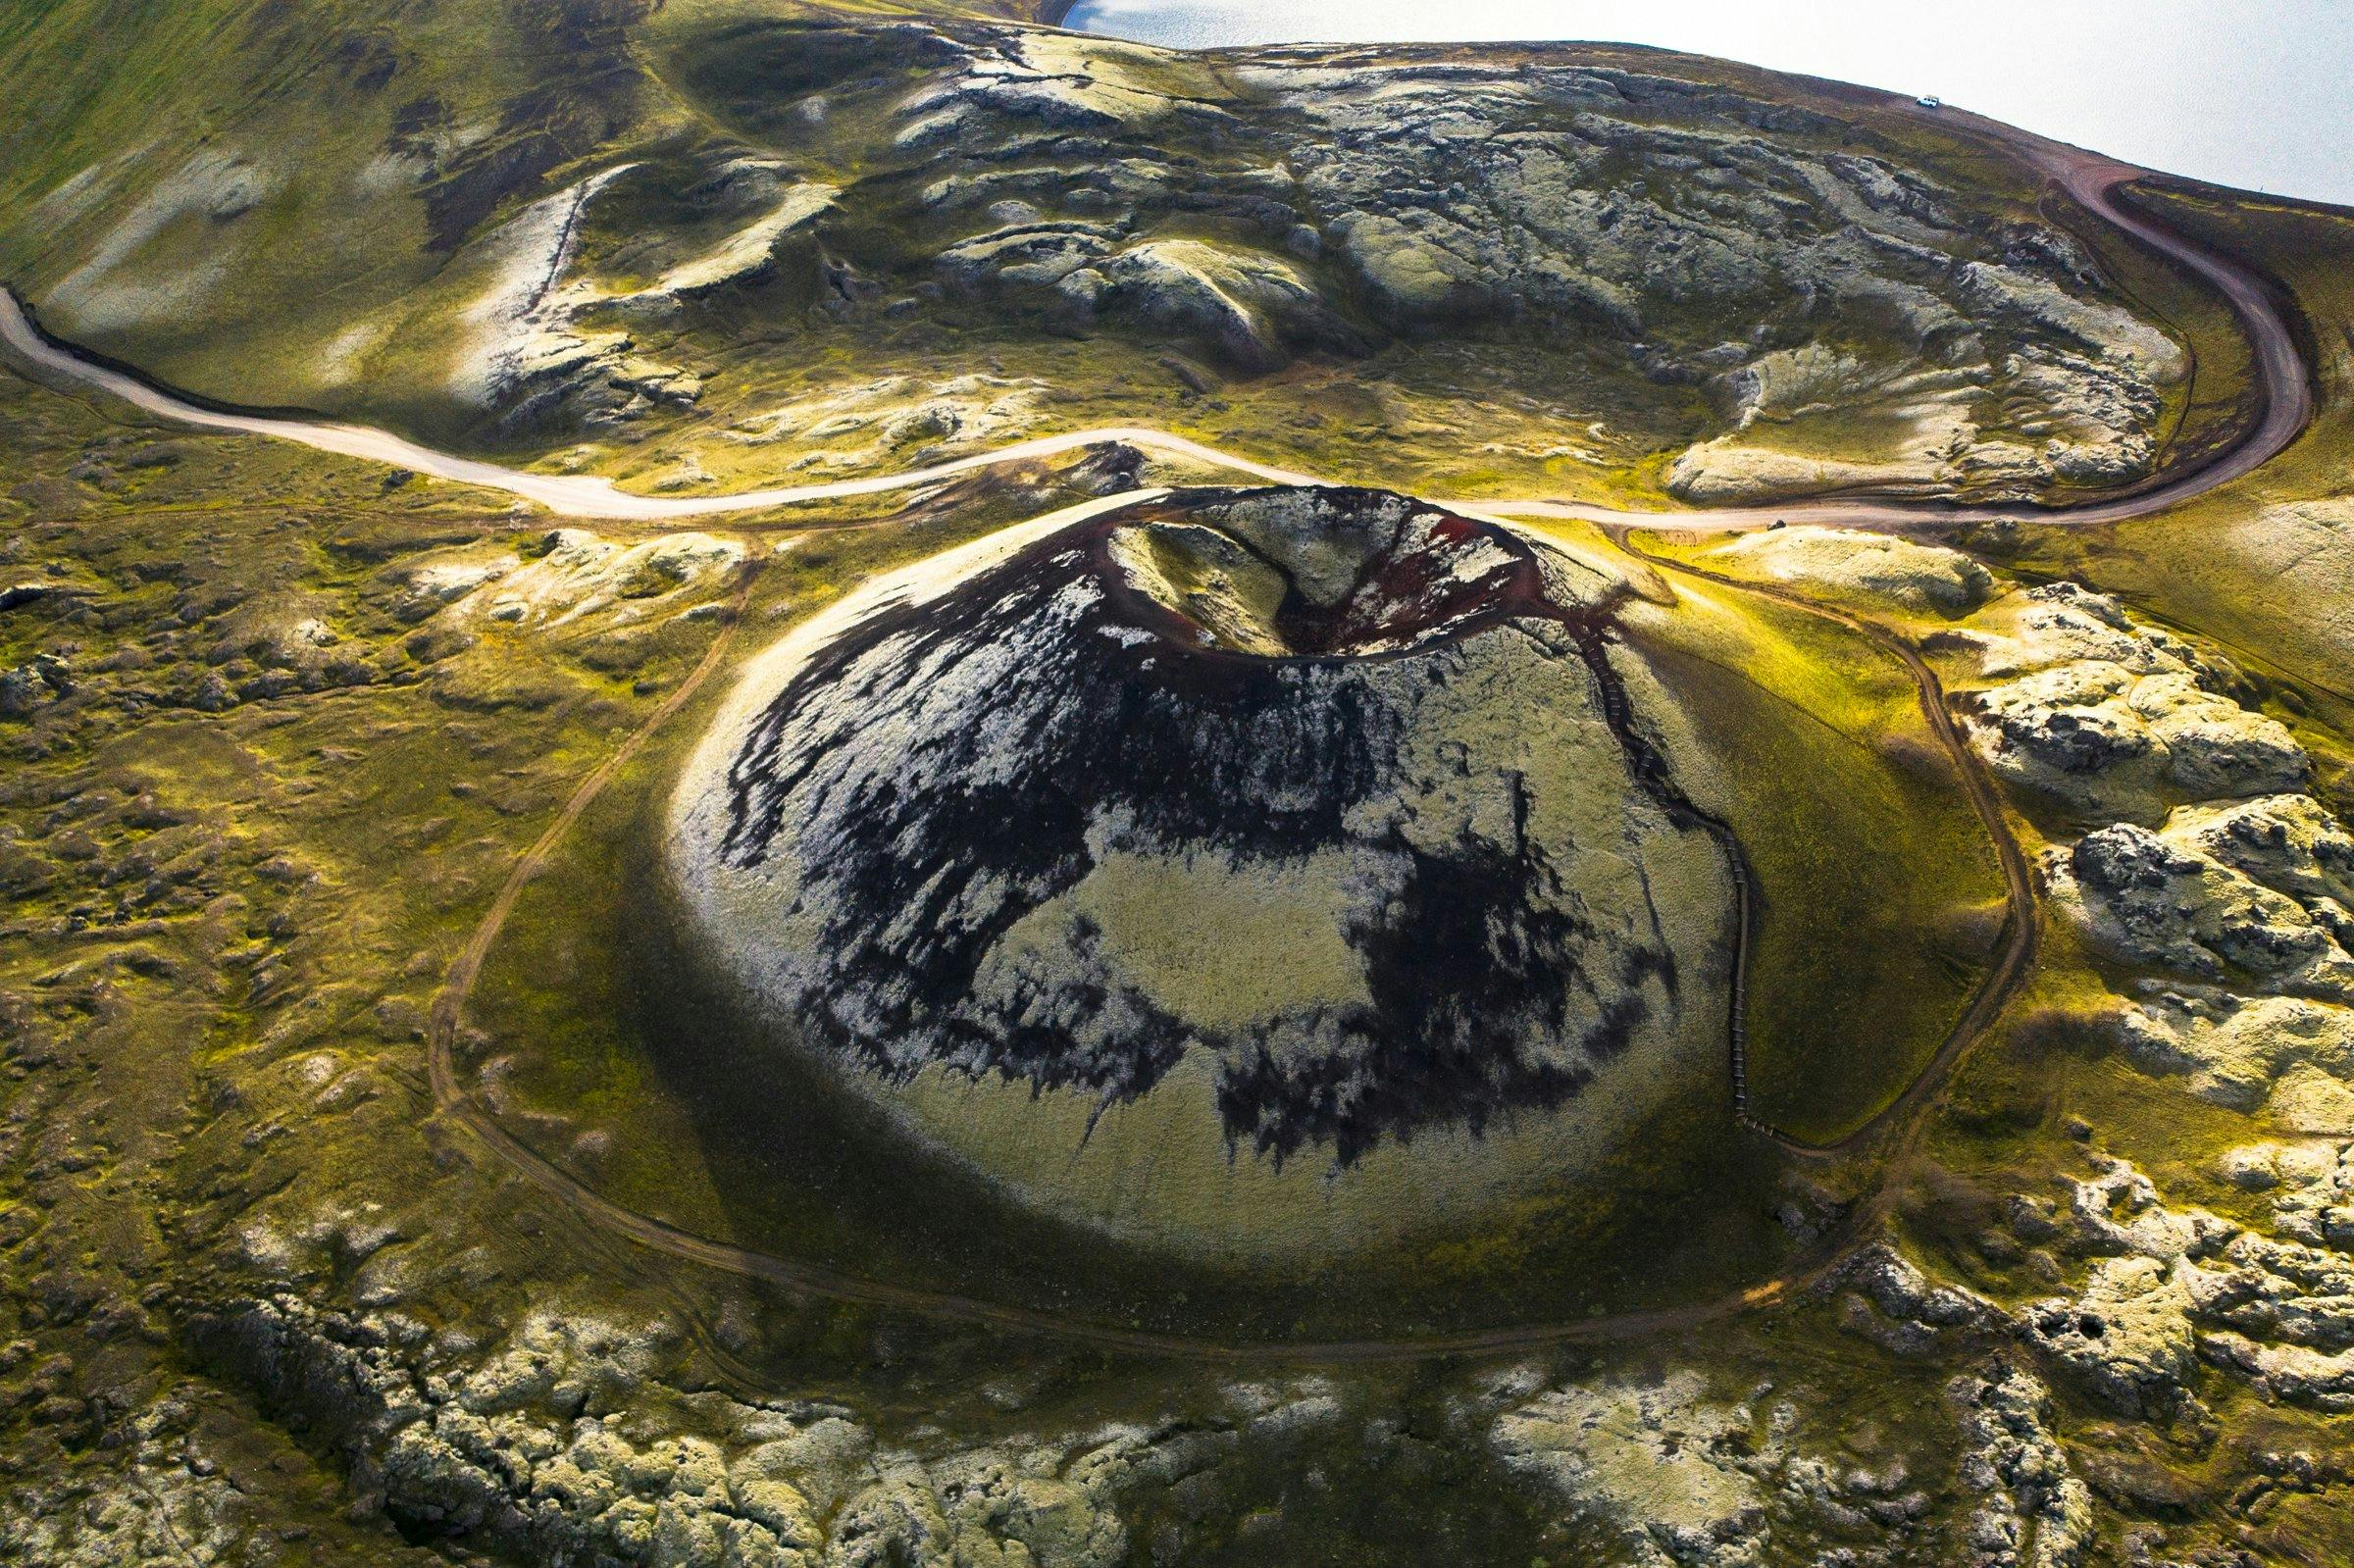 Aerial view of a volcanic crater surrounded by lava and moss